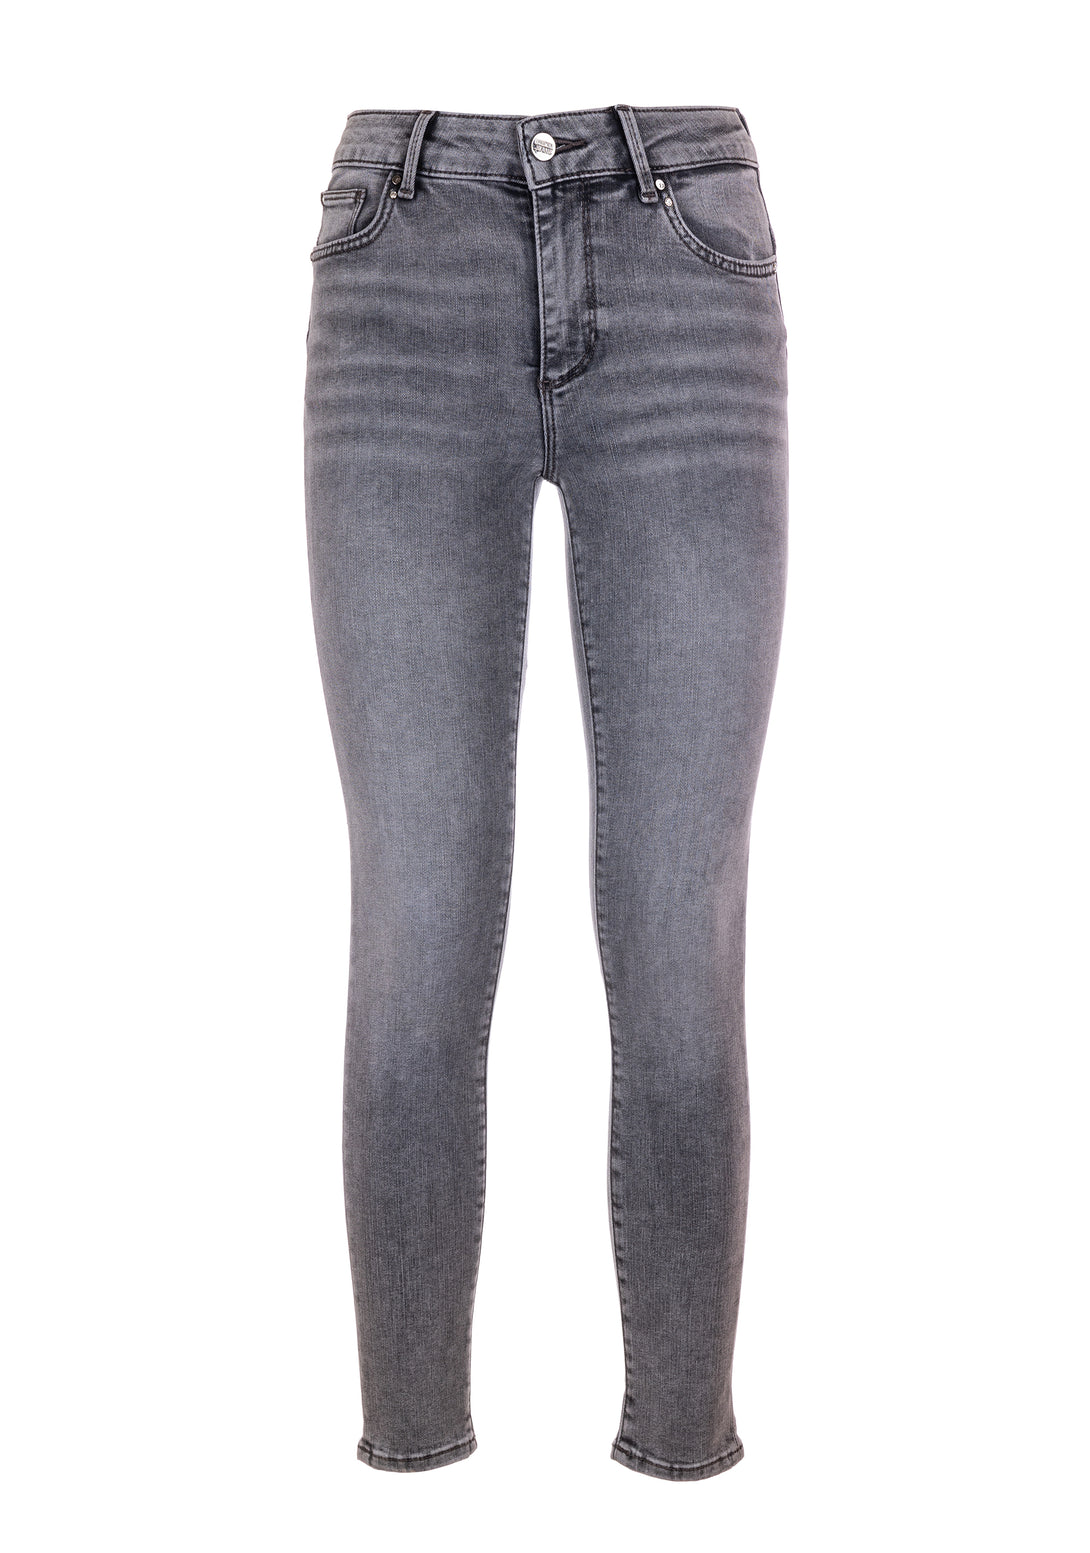 Jeans skinny fit with push up effect made in grey denim with middle wash